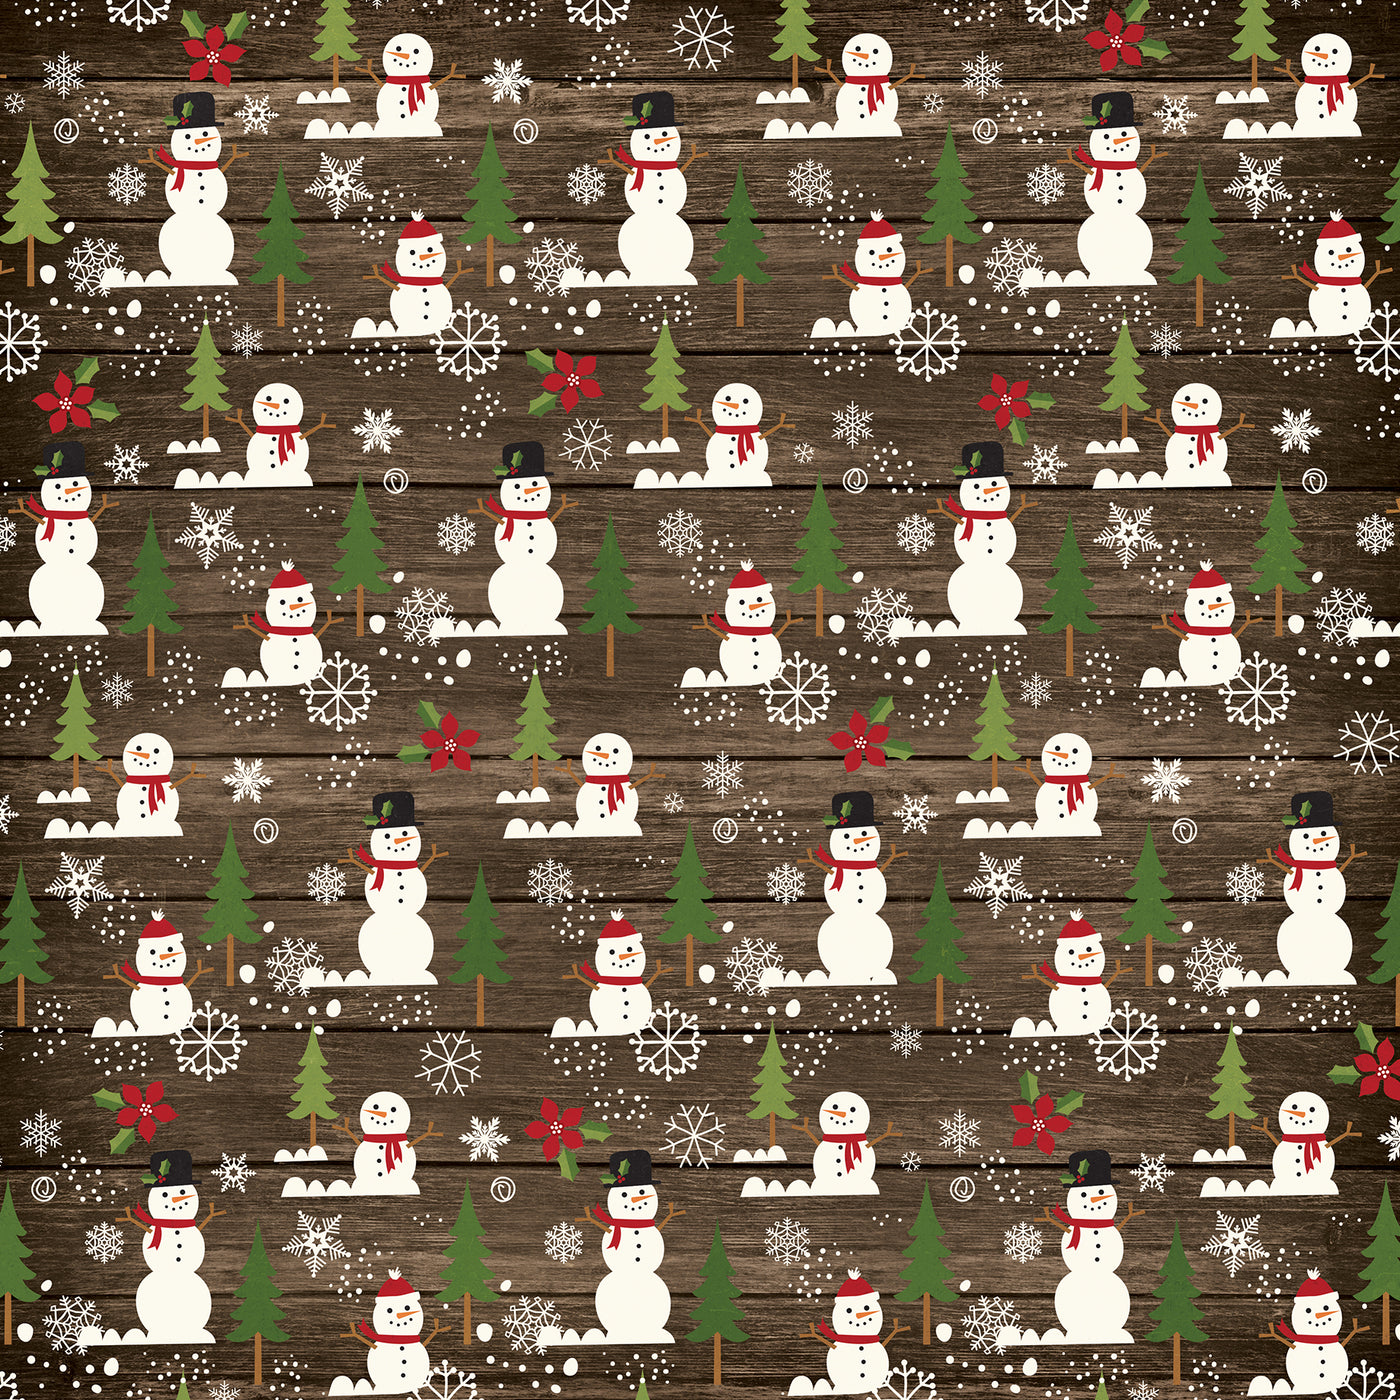 Side A - rows of snowmen and pine trees with snowflakes on a dark brown woodgrain background